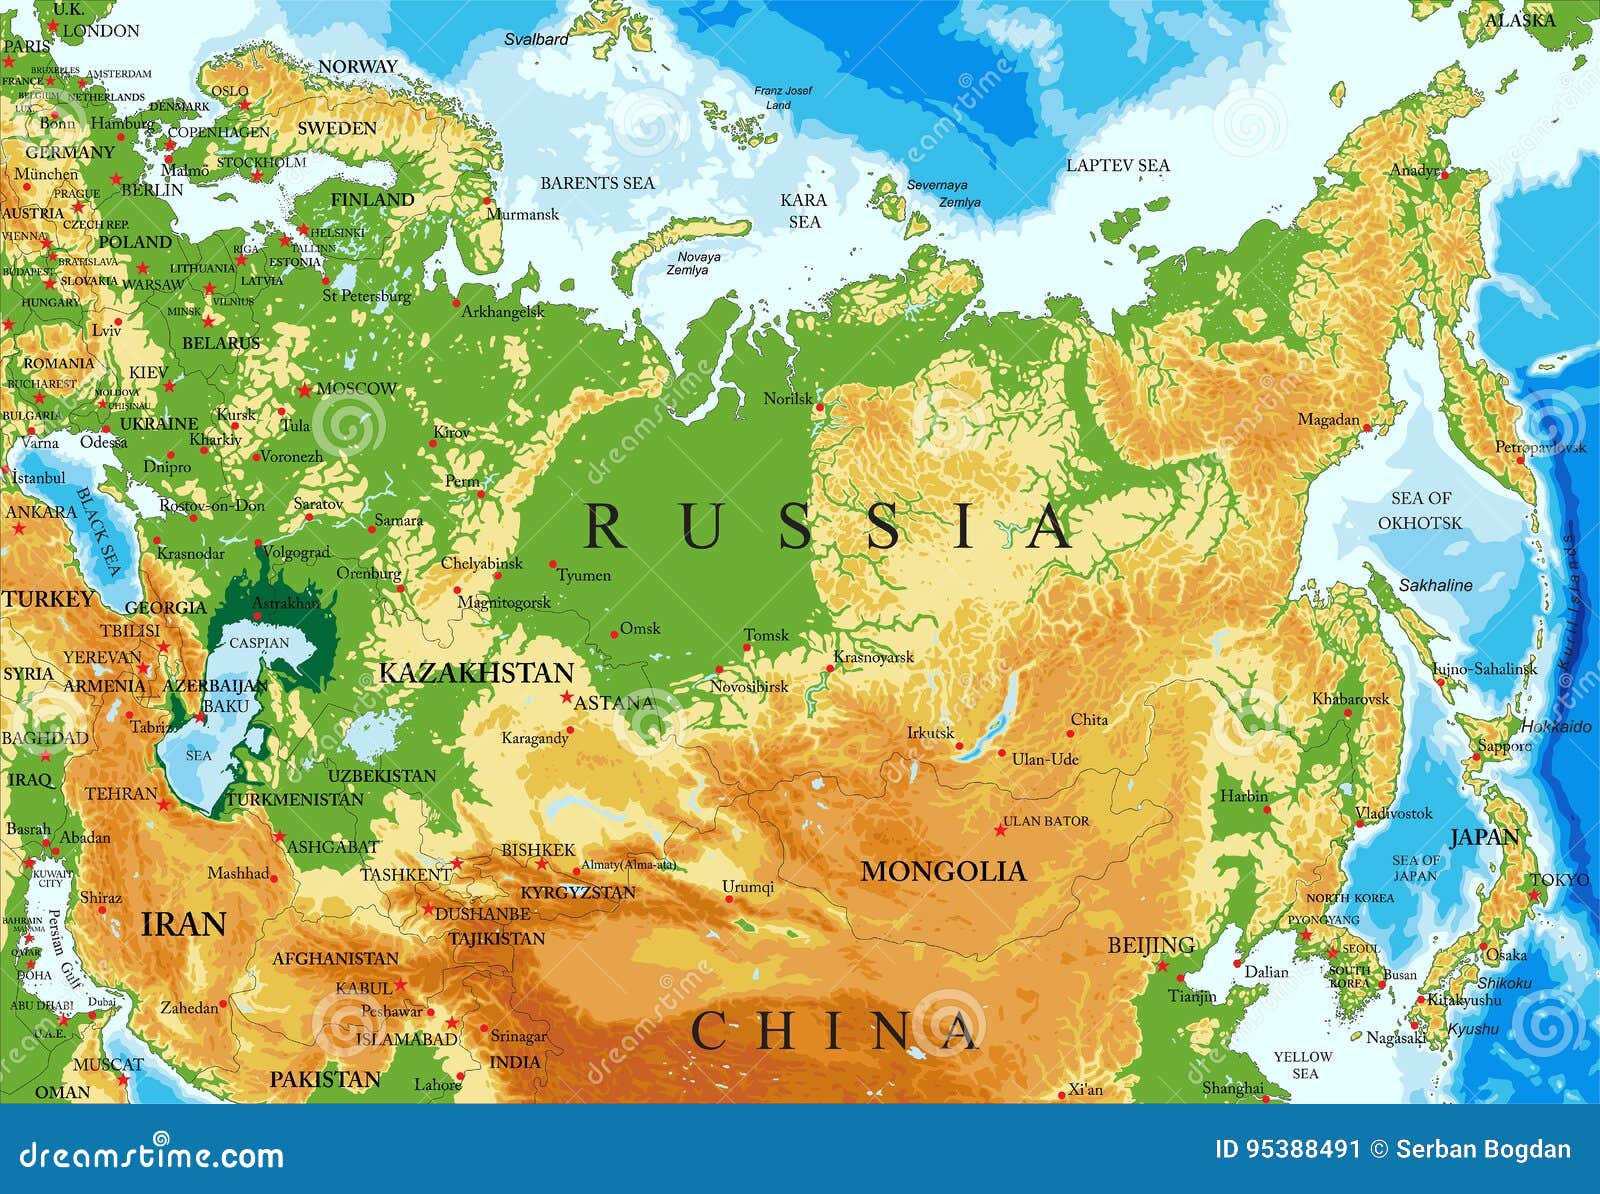 Russia relief map stock vector. Illustration of chukotka - 95388491